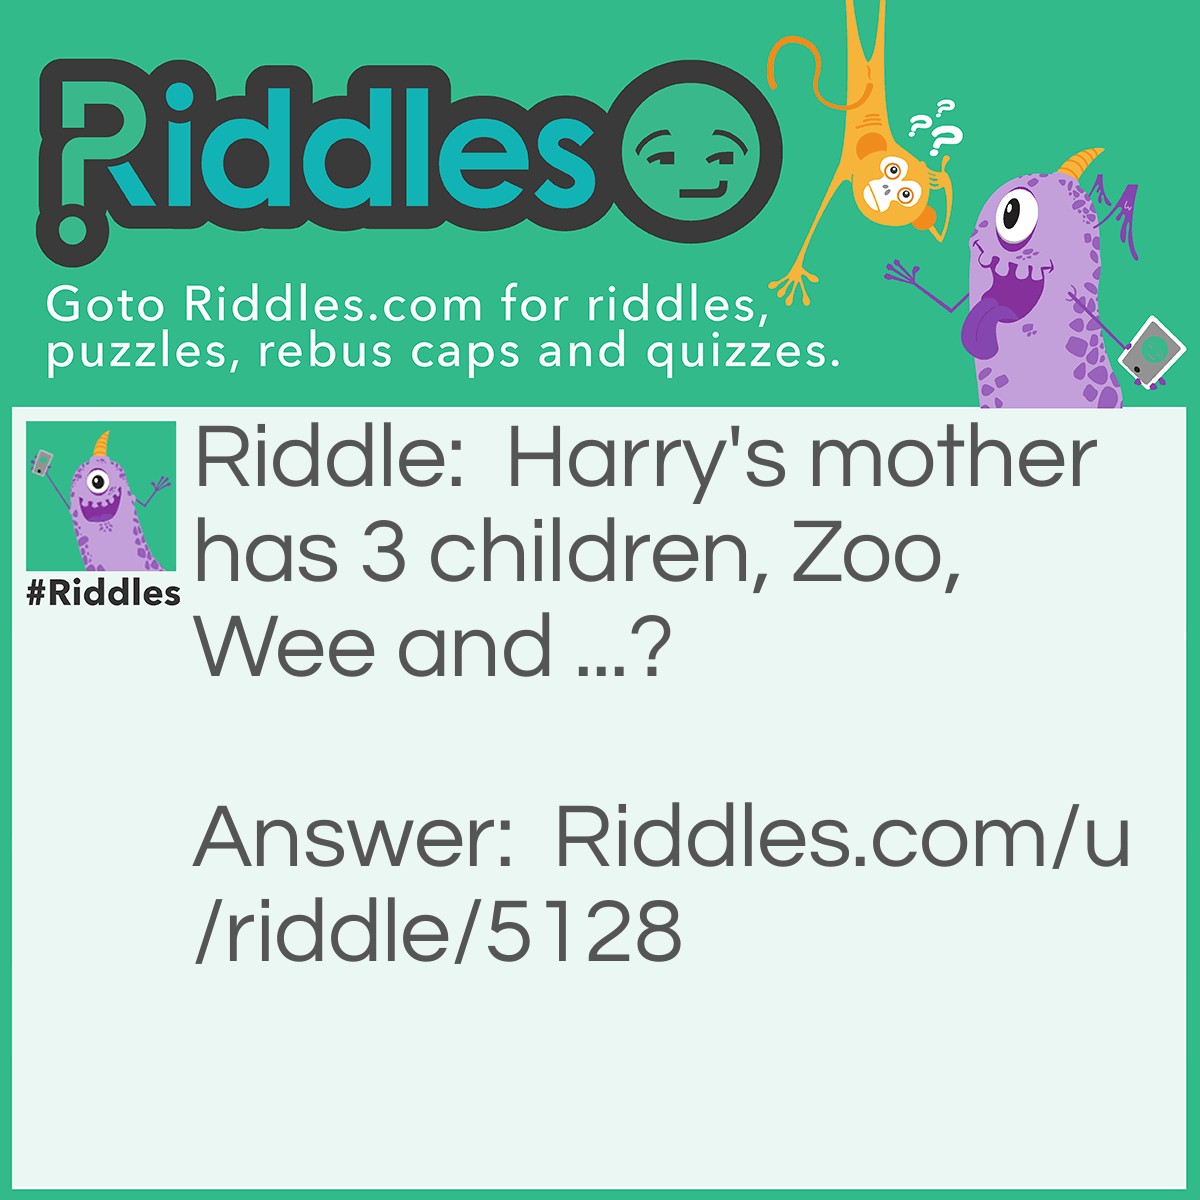 Riddle: Harry's mother has 3 children, Zoo, Wee and ...? Answer: Nope. Harry.